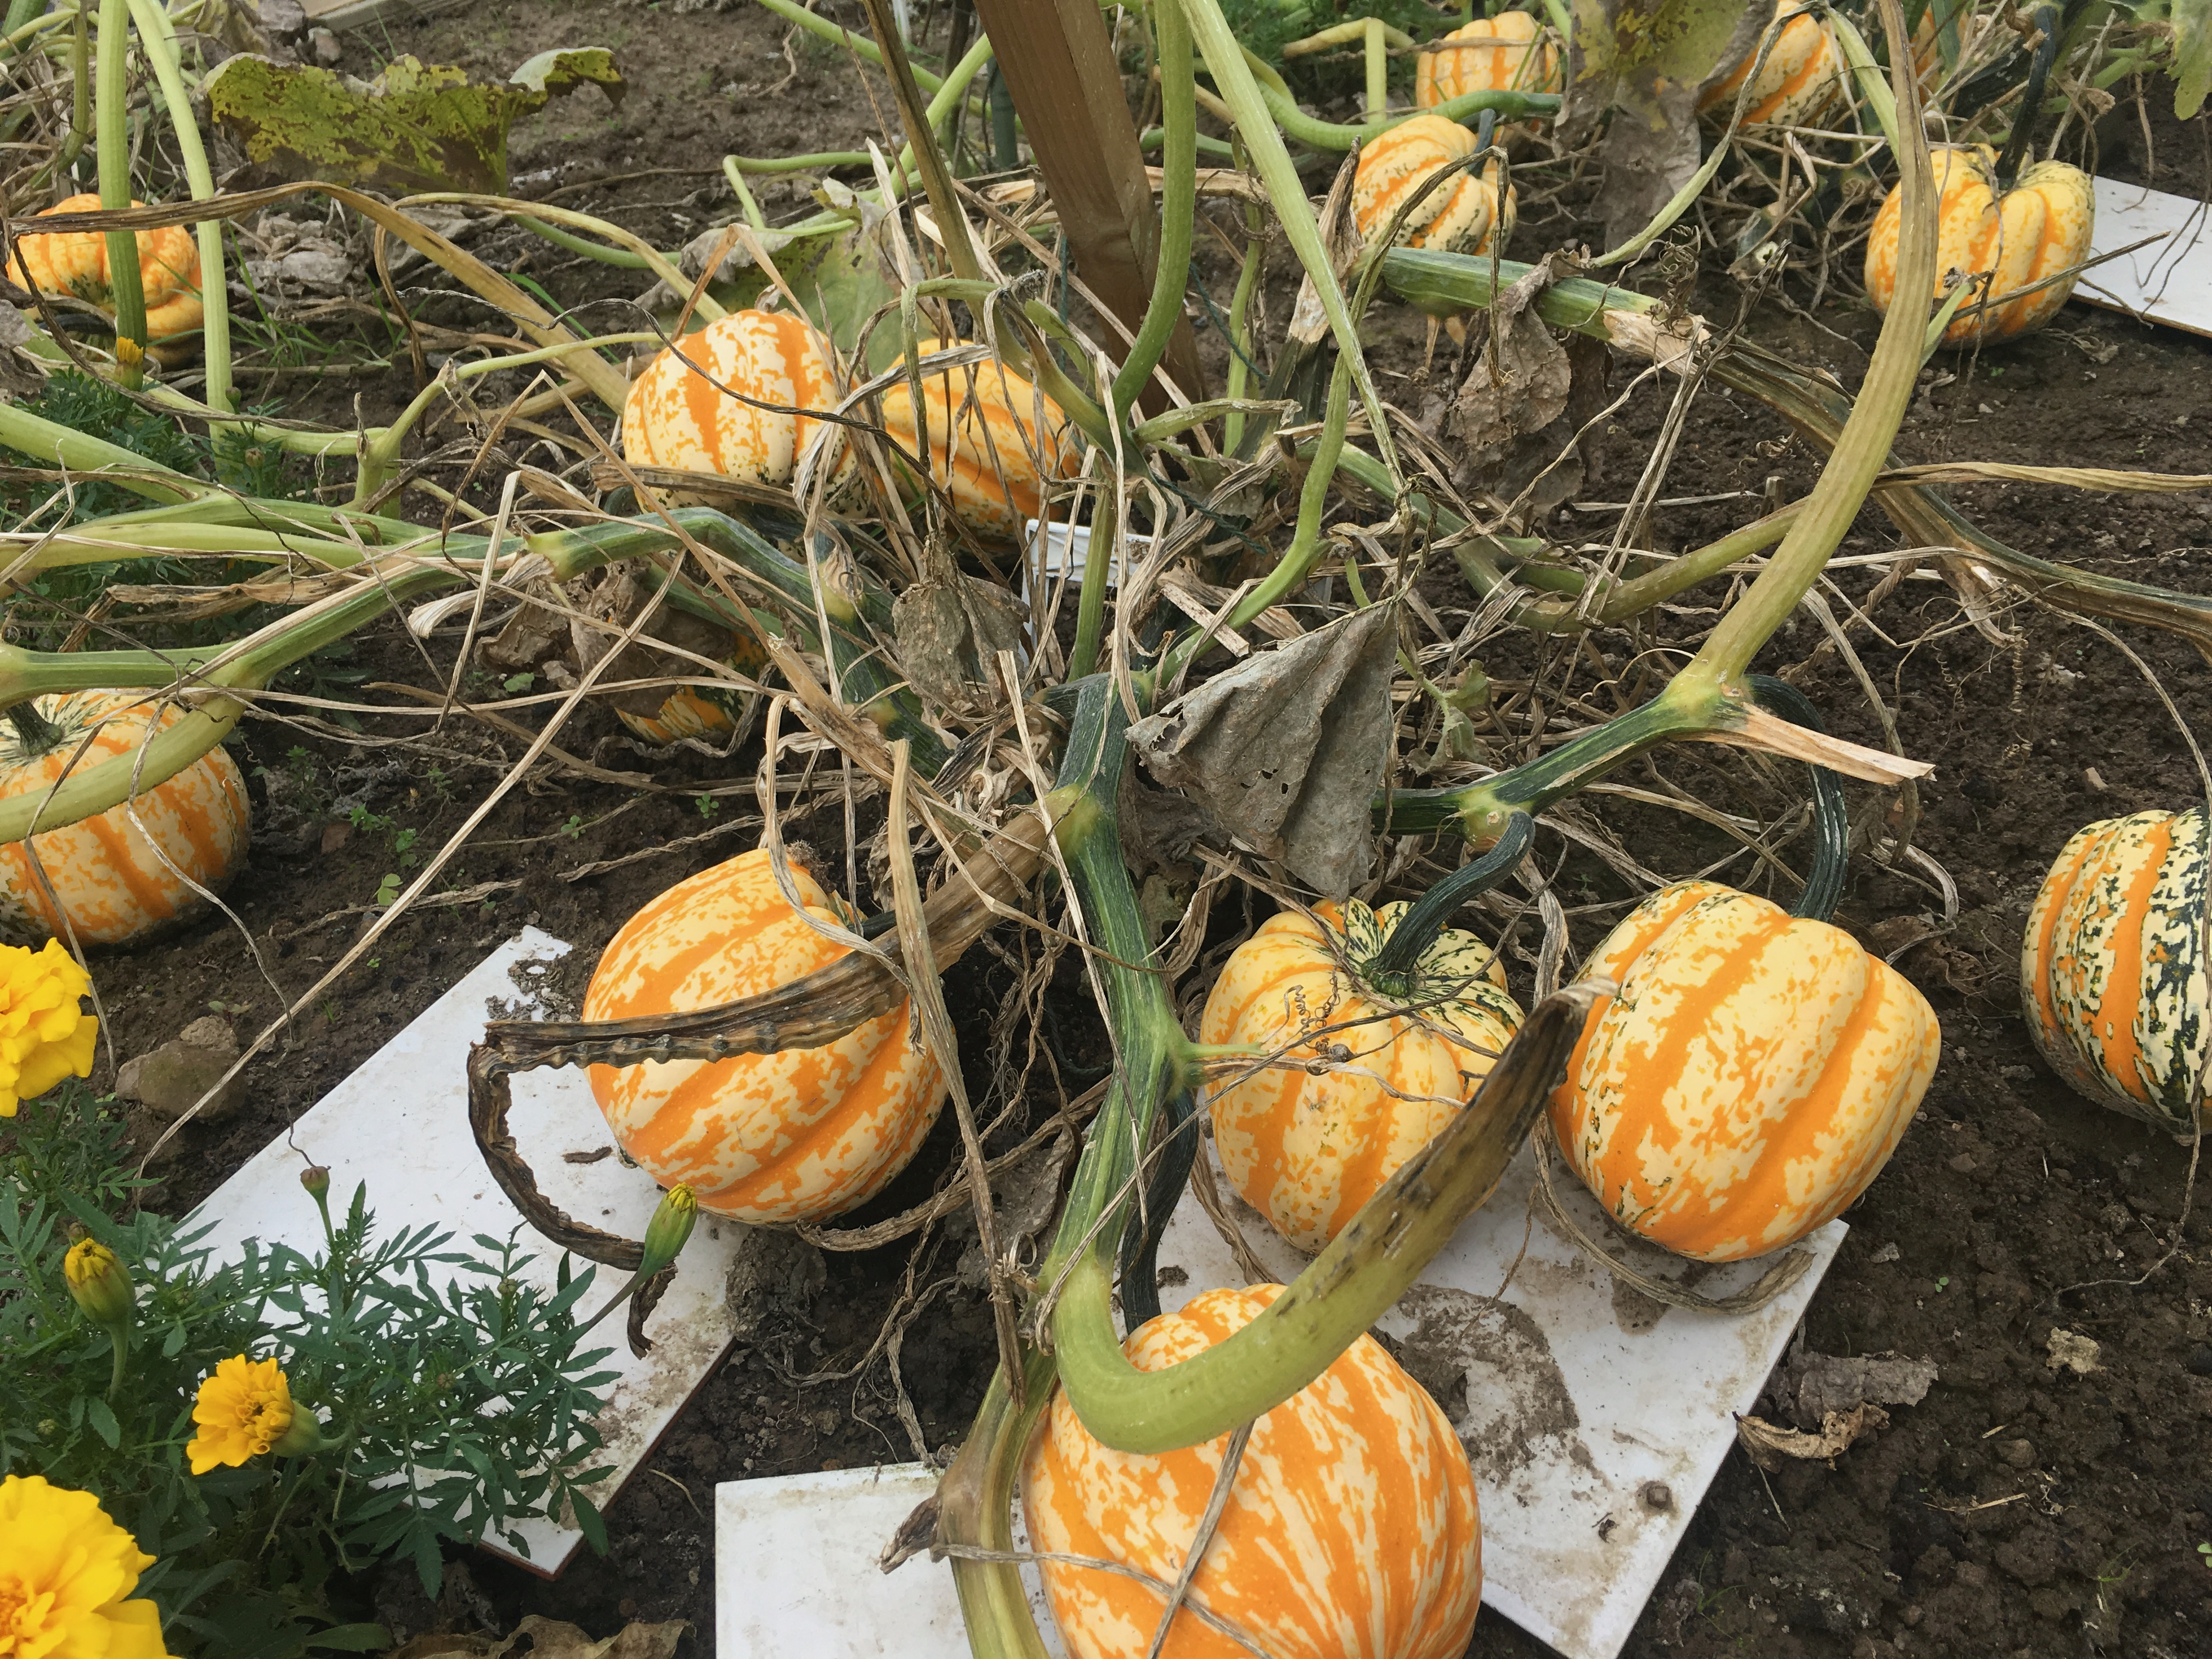 One of my mums pumpkin plants. It has some green vines with yellow and orange pumpkins. There are also some dead brown/black vines. The pumpkins are sat on white tiles.